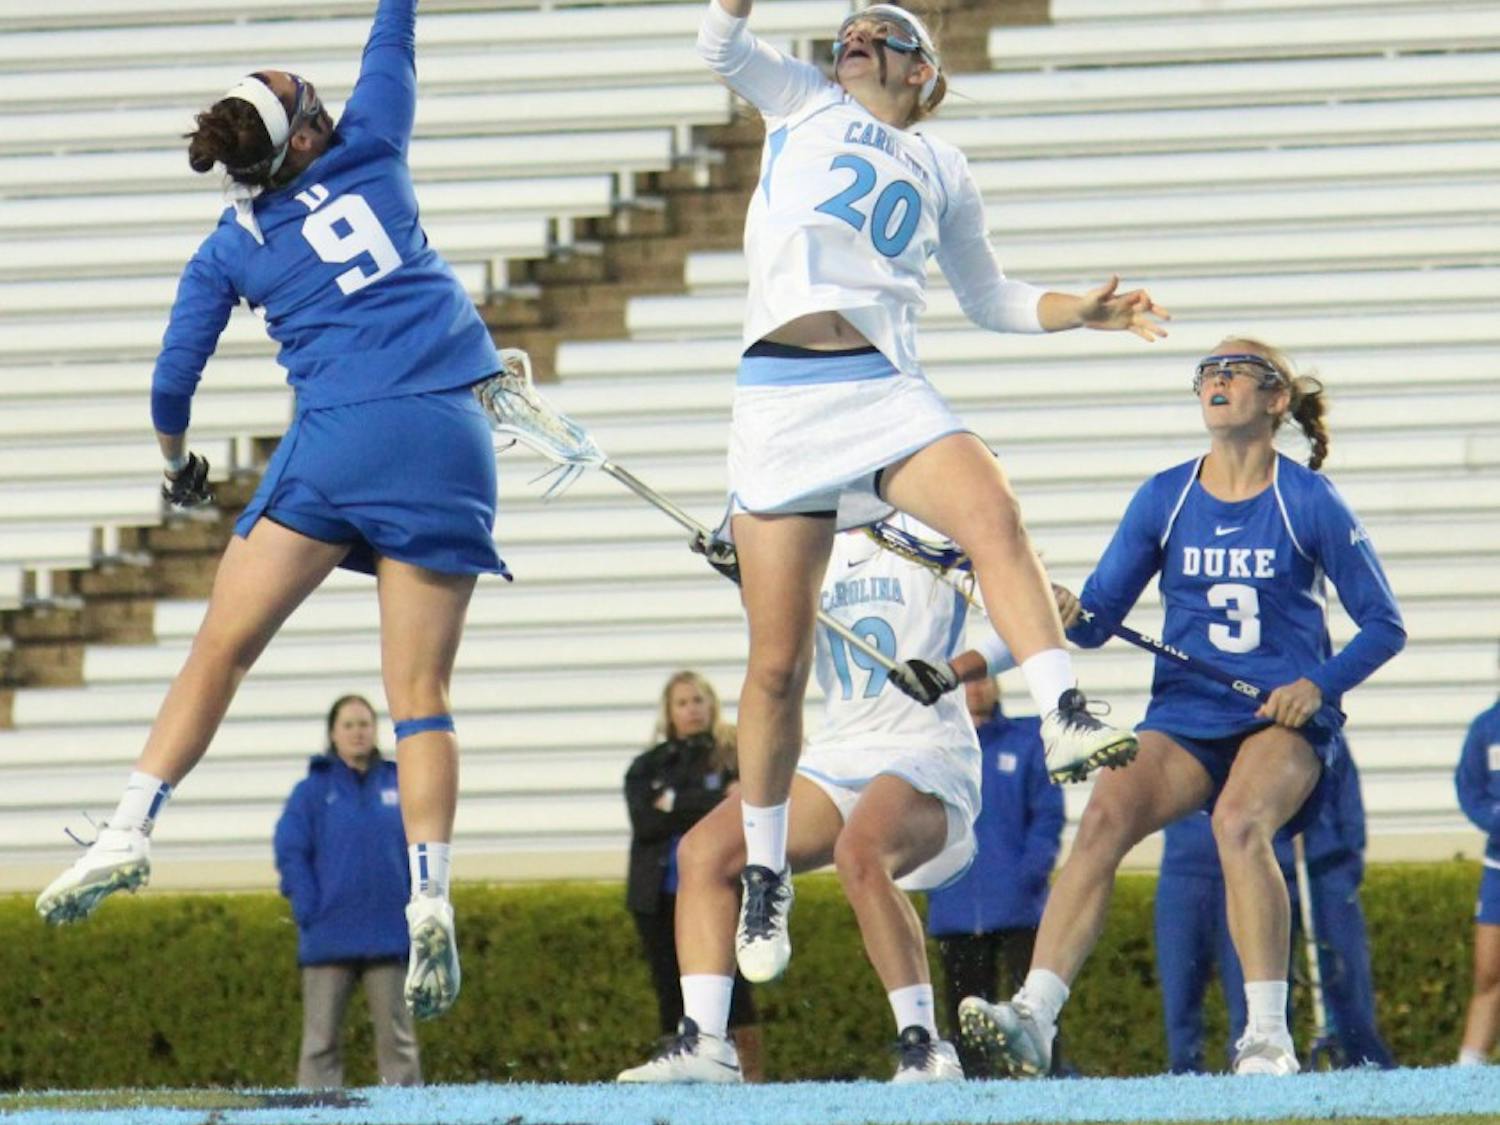 Women's lacrosse suffers a loss 7-6 to Duke in overtime on Wednesday in Kenan Stadium. Molly Hendrick (20) faces off in the first half. 